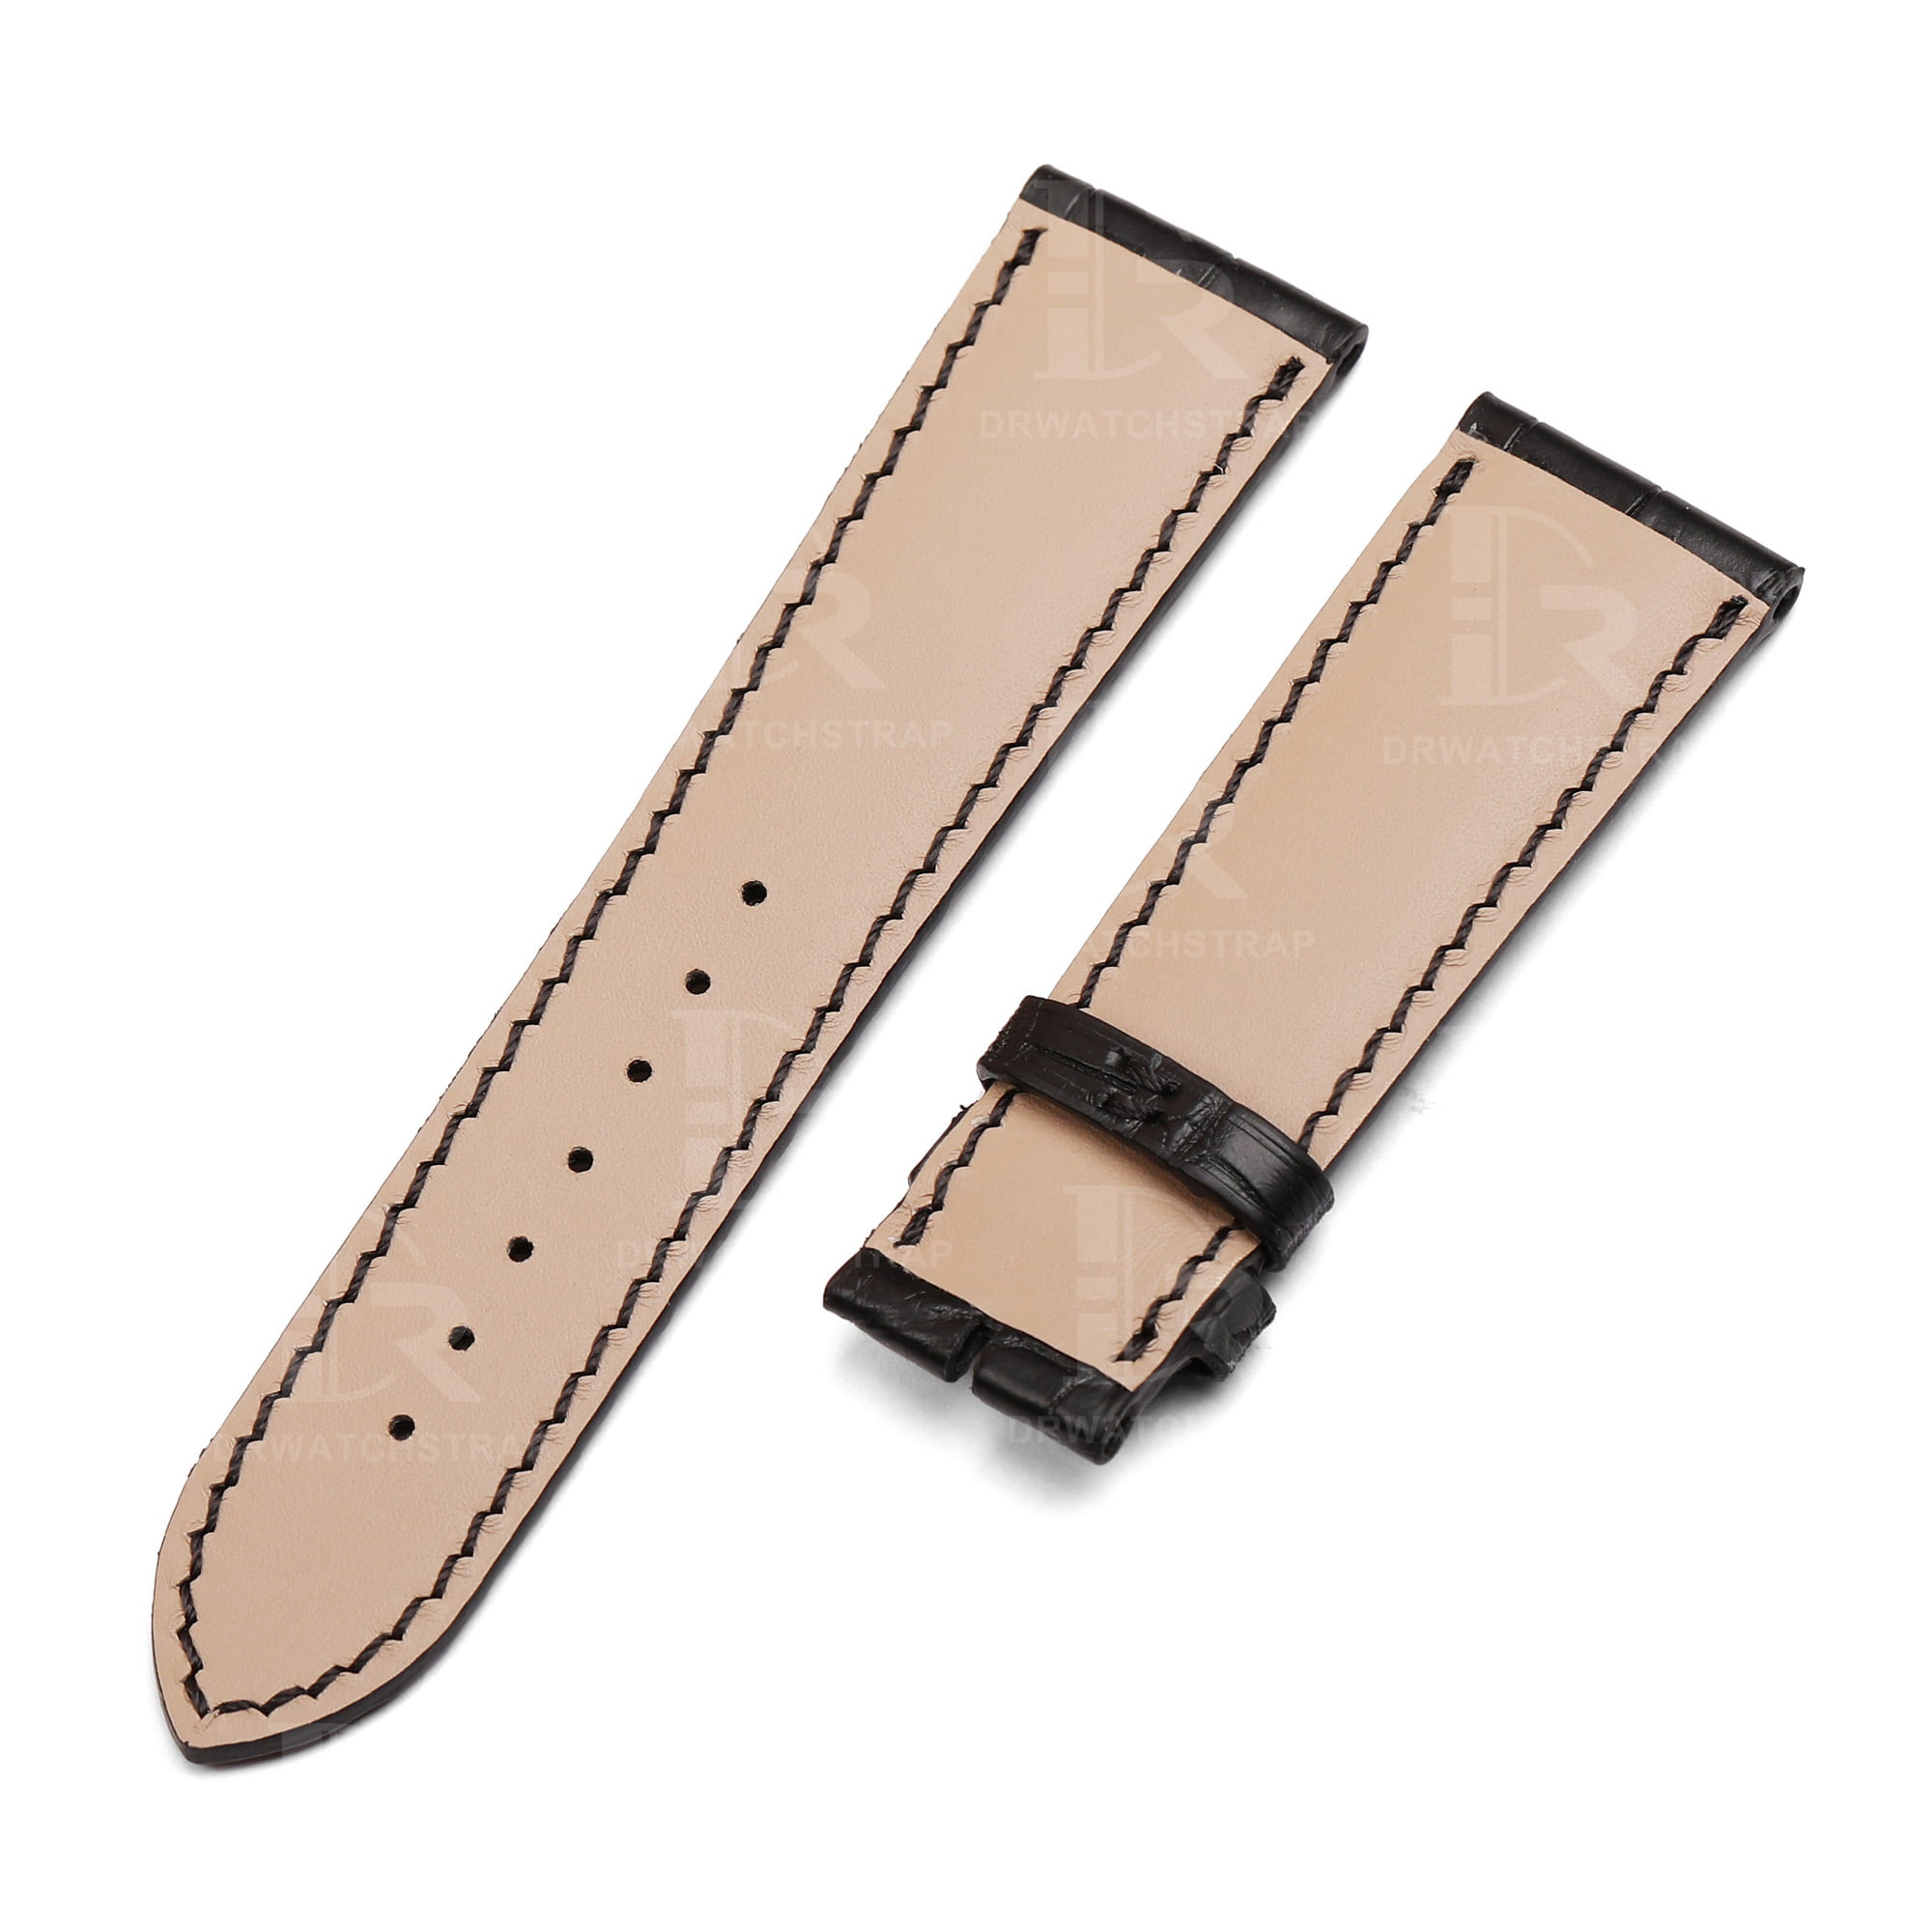 Buy Custom Zenith ELITE ACADEMYEL PRIMERO Black Leather Strap 19mm 20mm 21mm 22mm Replacement for watch band (2)